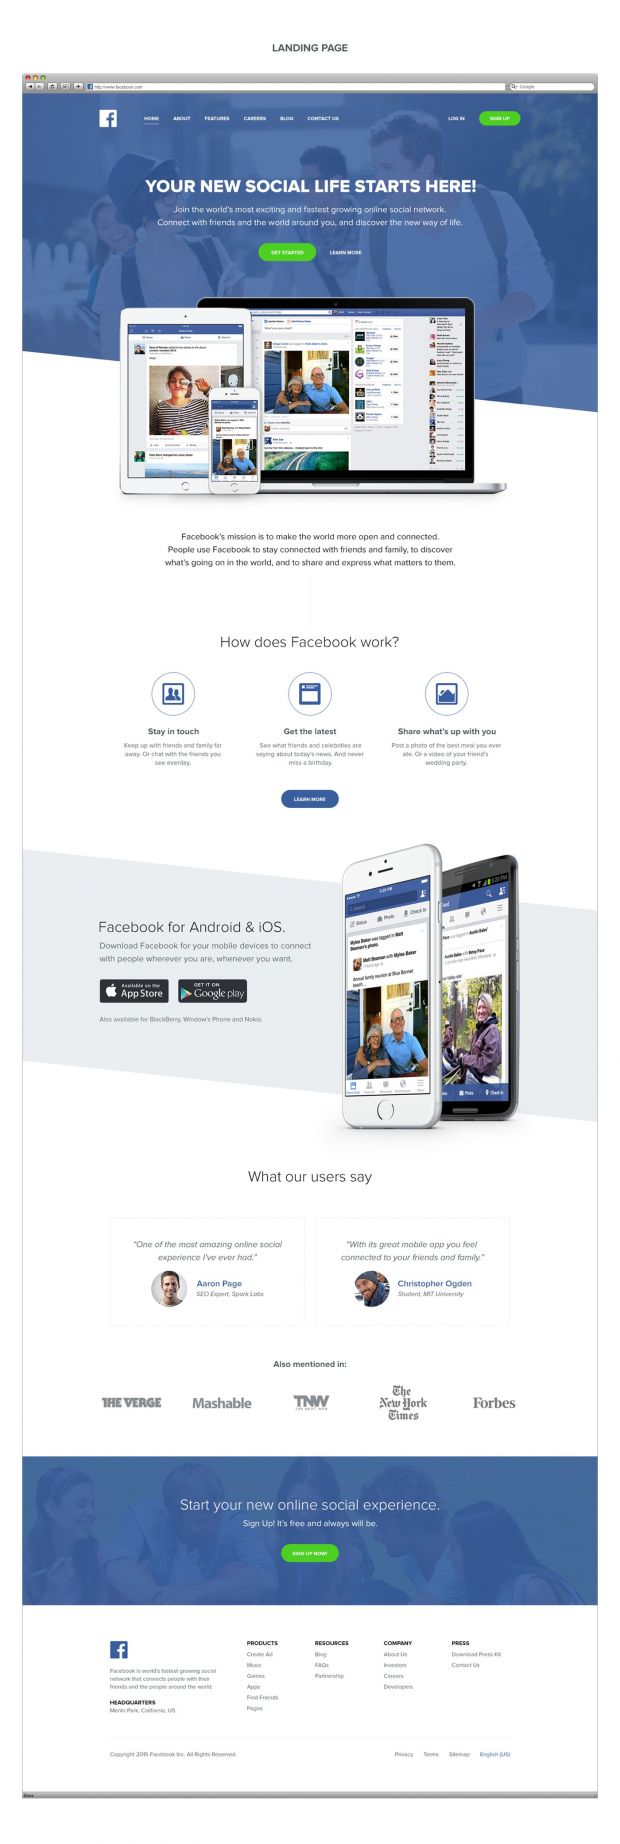 Landing page concept for Facebook, if it started in 2015 as a new startup